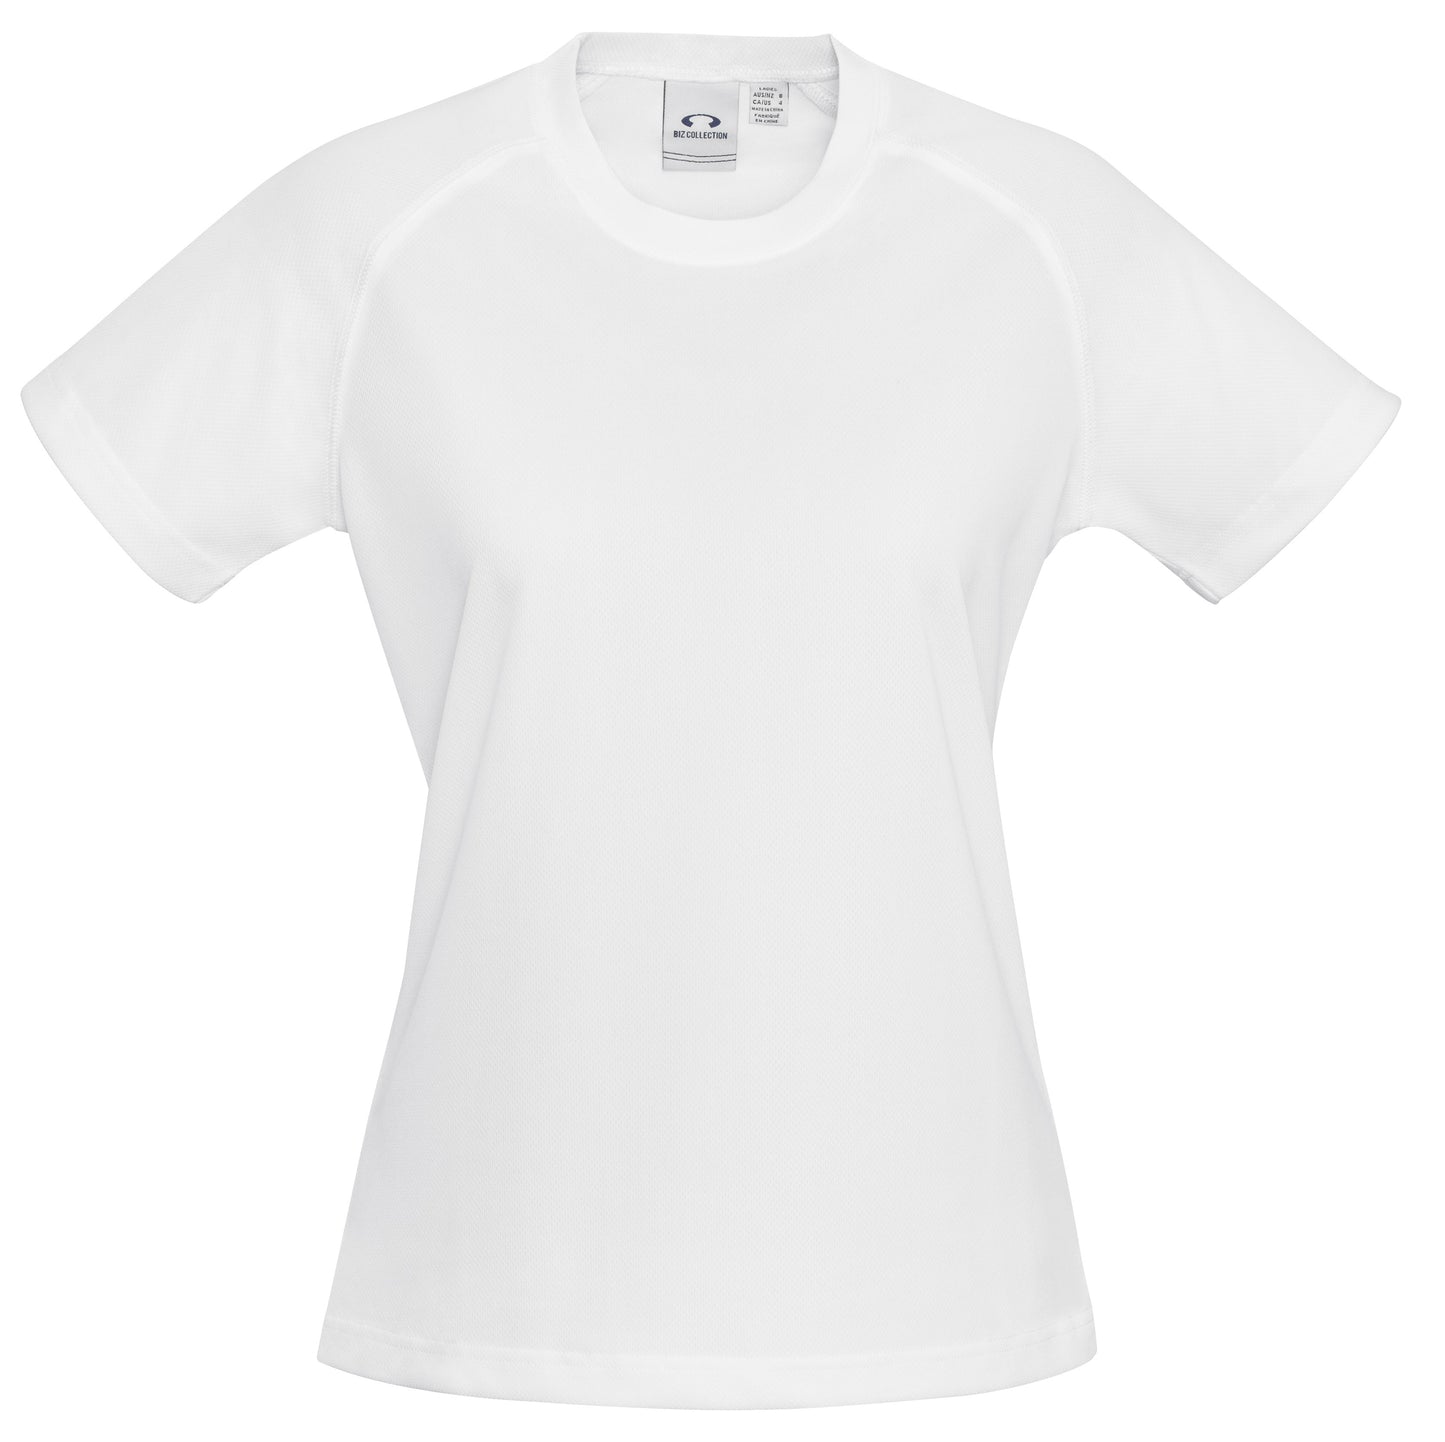 Ladies Sprint T-Shirt -White Only